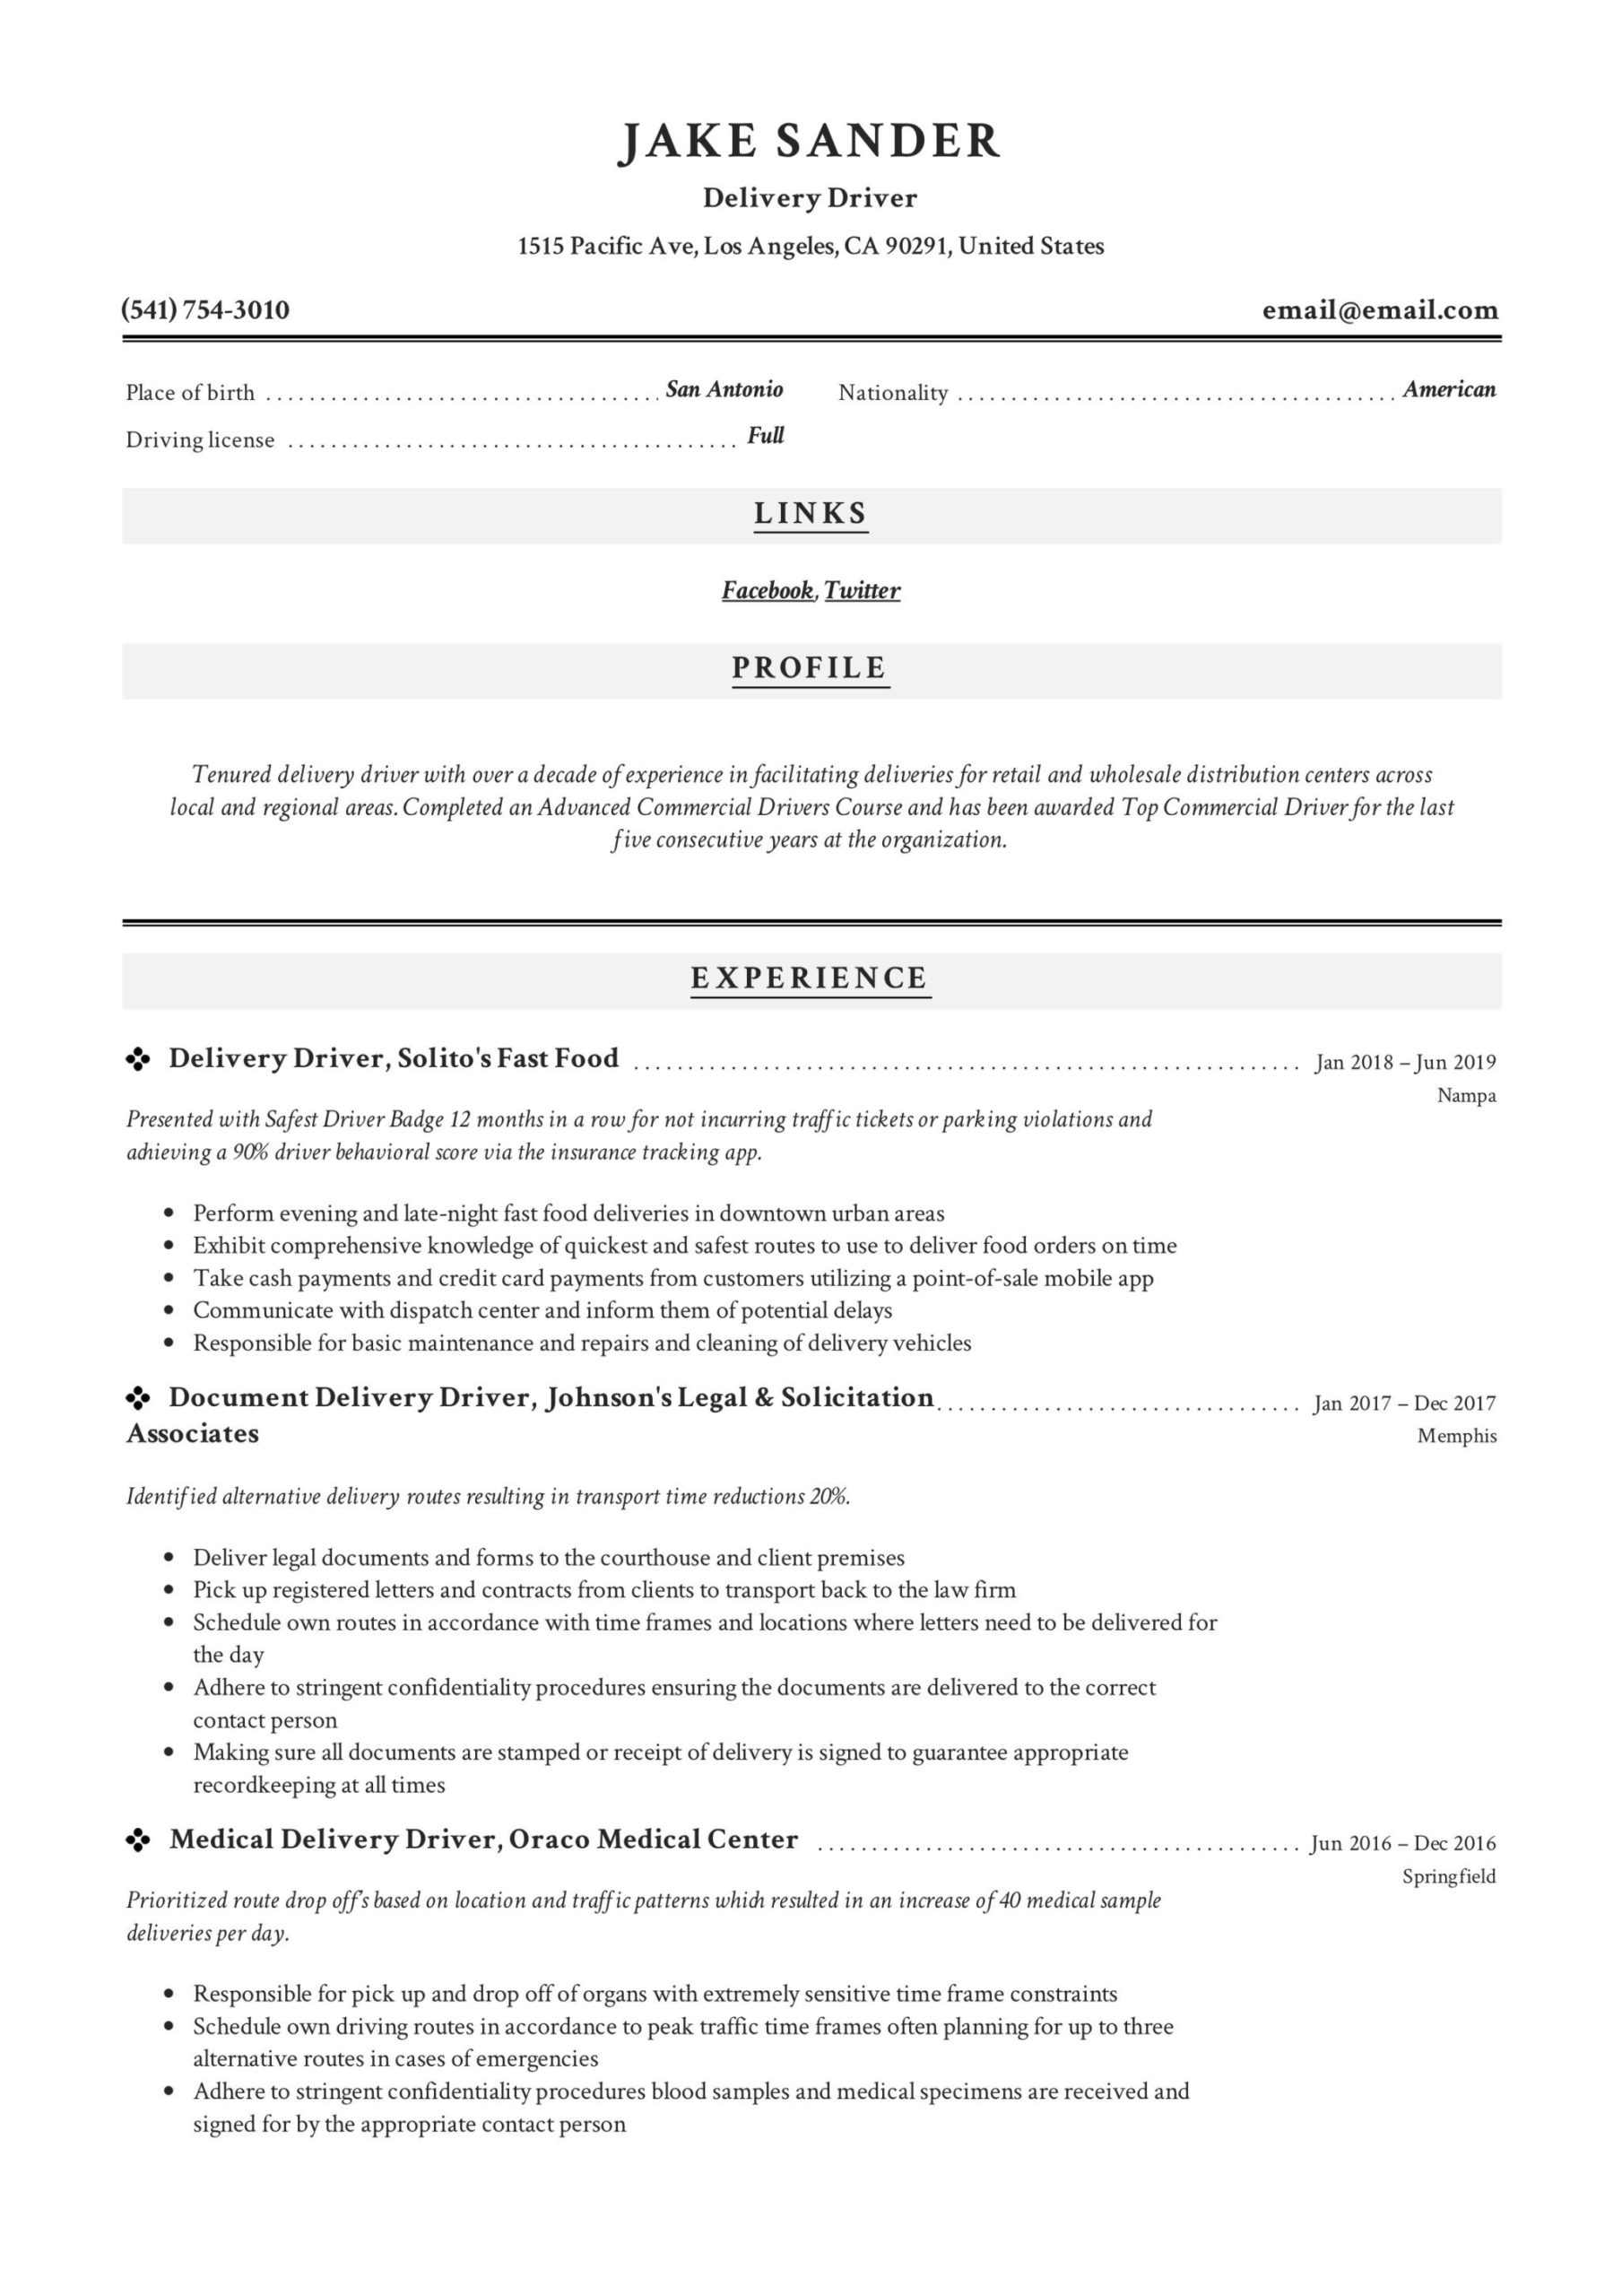 Sample Resume for Delivery Truck Driver Delivery Driver Resume & Writing Guide  12 Resume Examples 2022